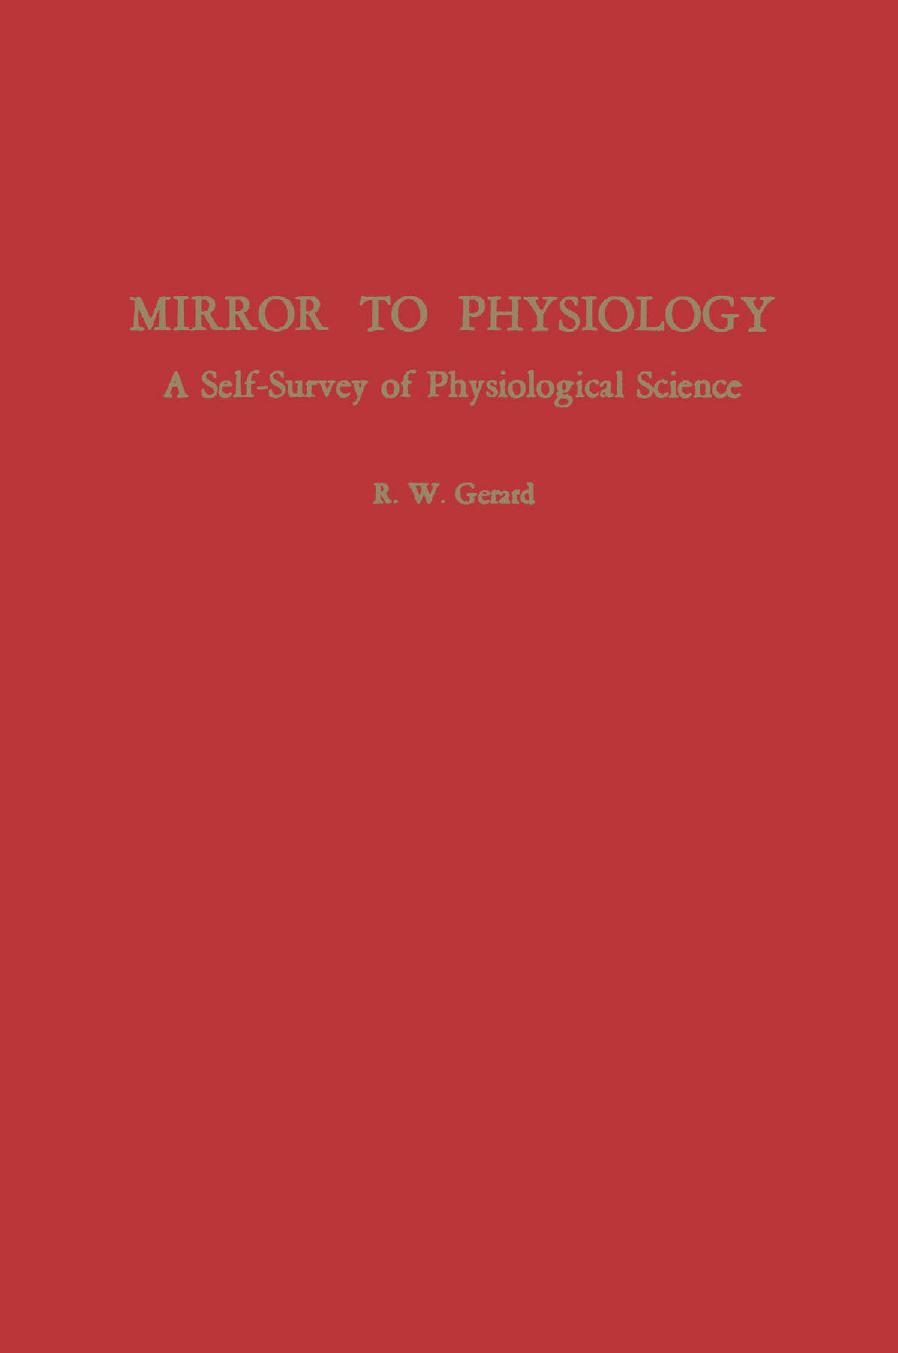 Mirror to Physiology  A Self-Survey of Physiological Science 1958